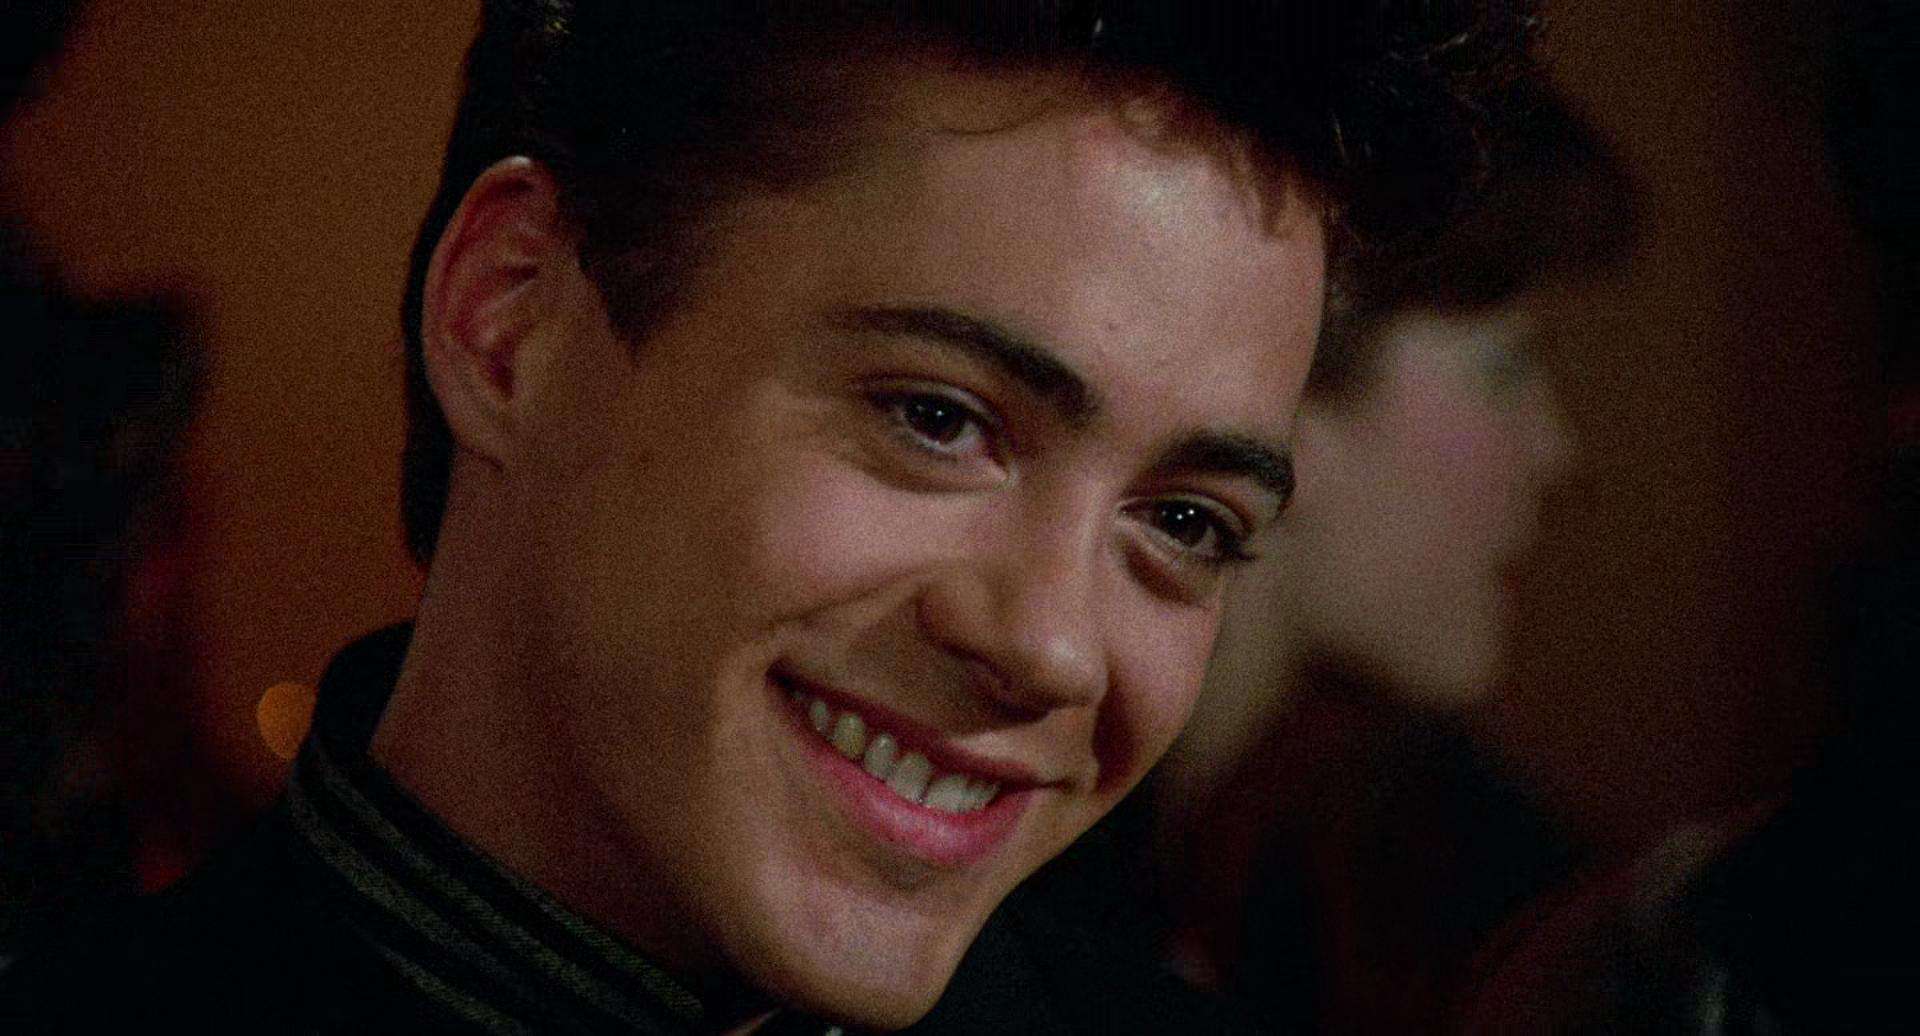 Robert Downey Jr. smiles in this image from Hughes Entertainment.